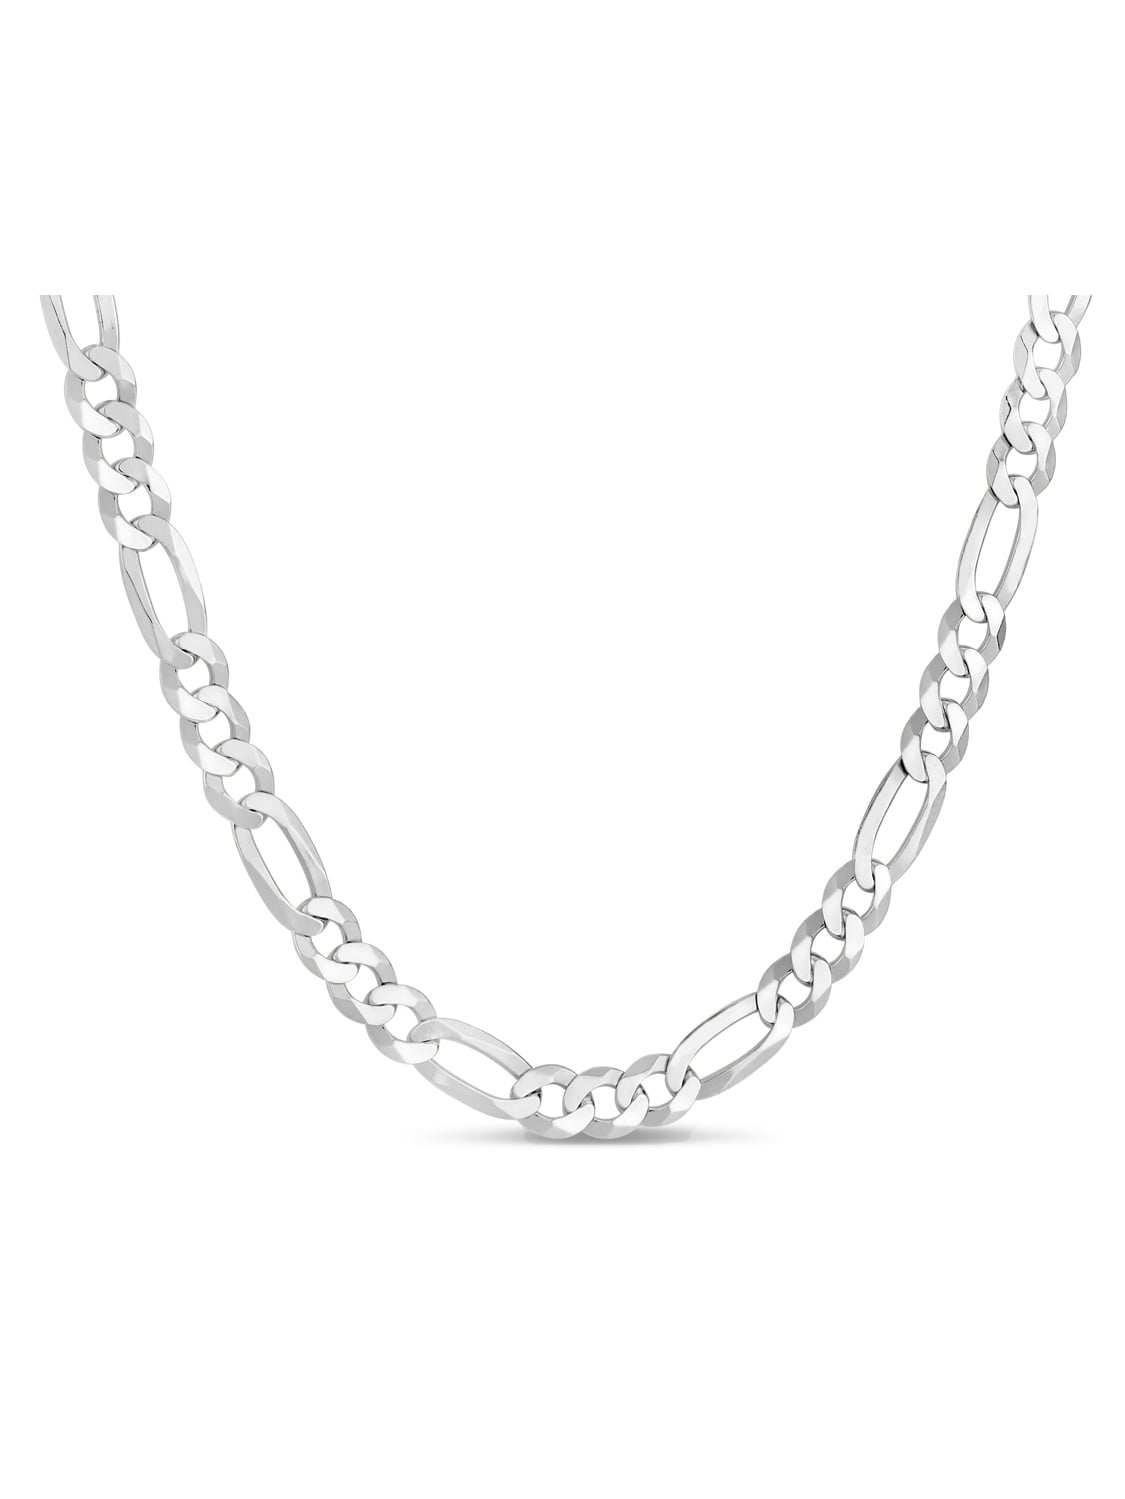 4.5MM Figaro Link Chain Necklace 925 Sterling Silver 3MM 3.5MM 4MM Silver Figaro Link Necklace for Men and Women18-30